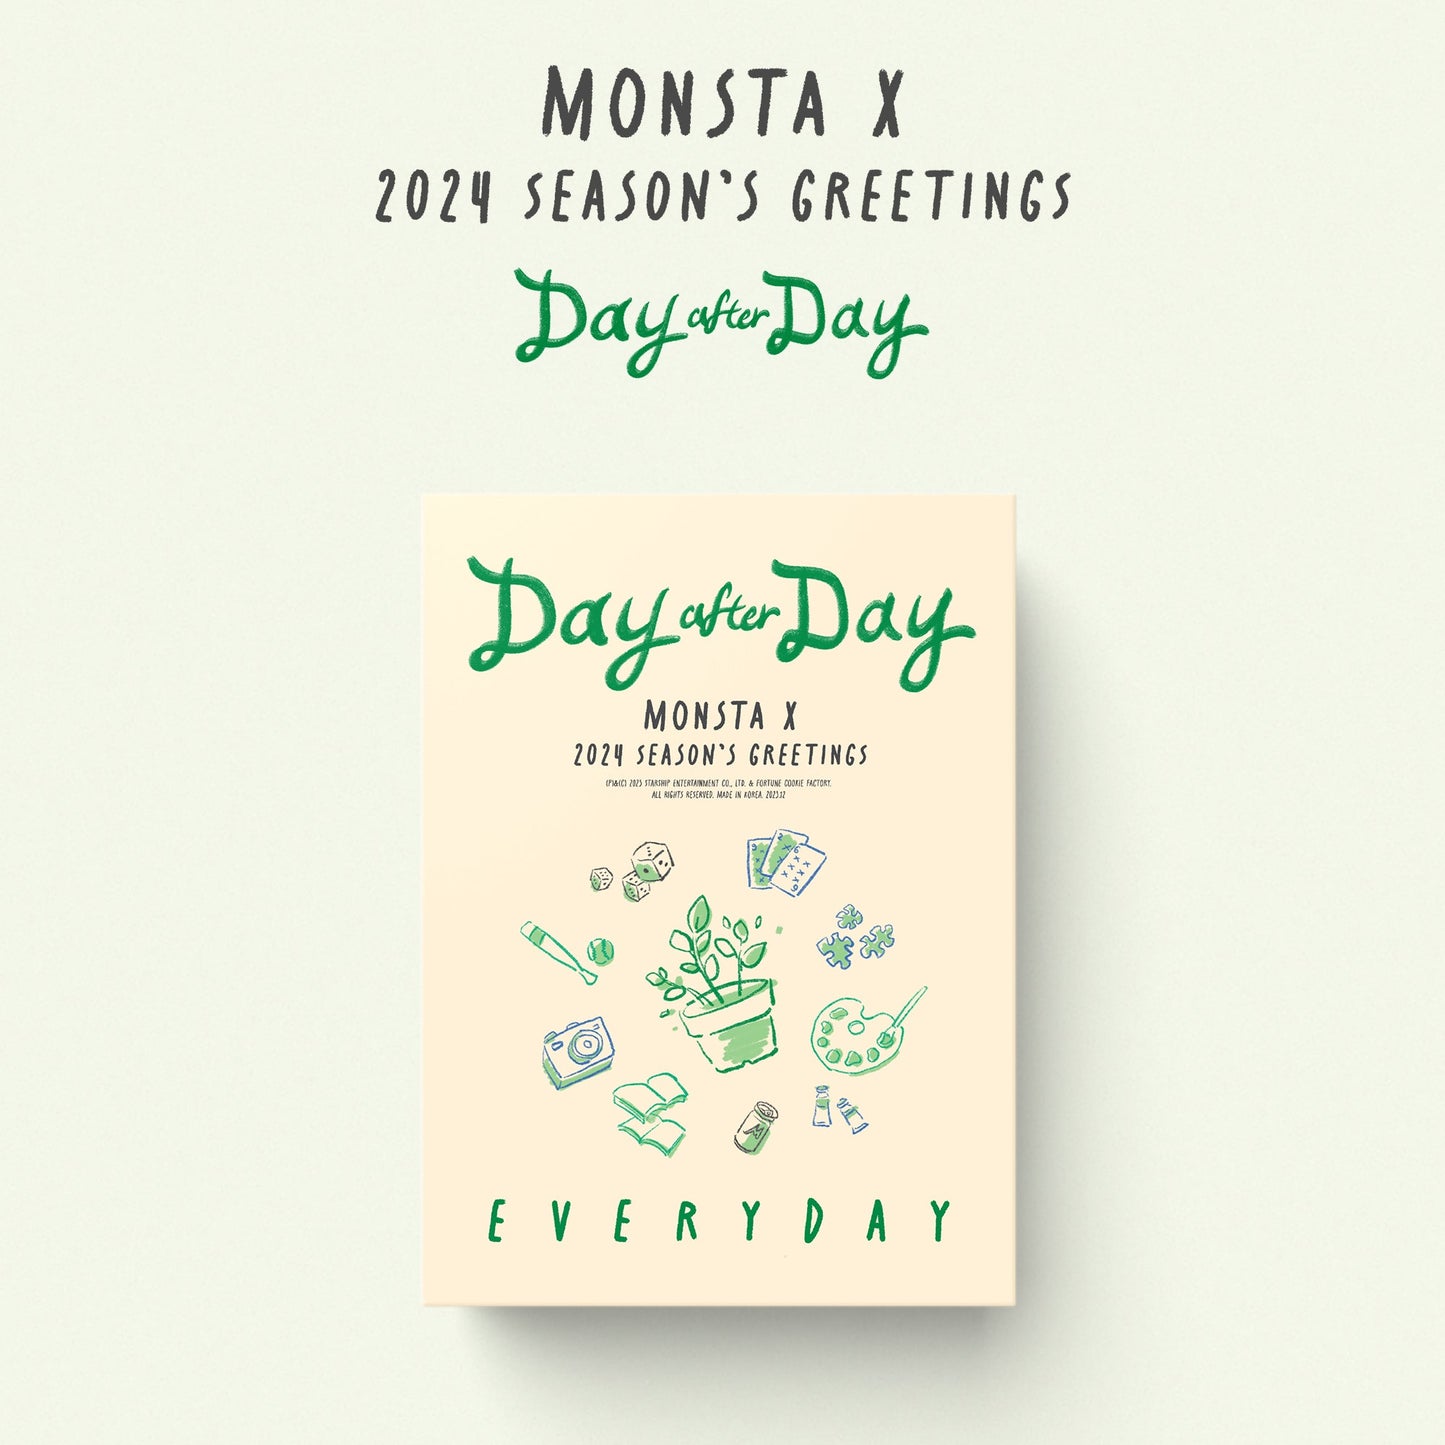 MONSTA X 2024 SEASON'S GREETINGS 'DAY AFTER DAY' EVERYDAY VERSION COVER